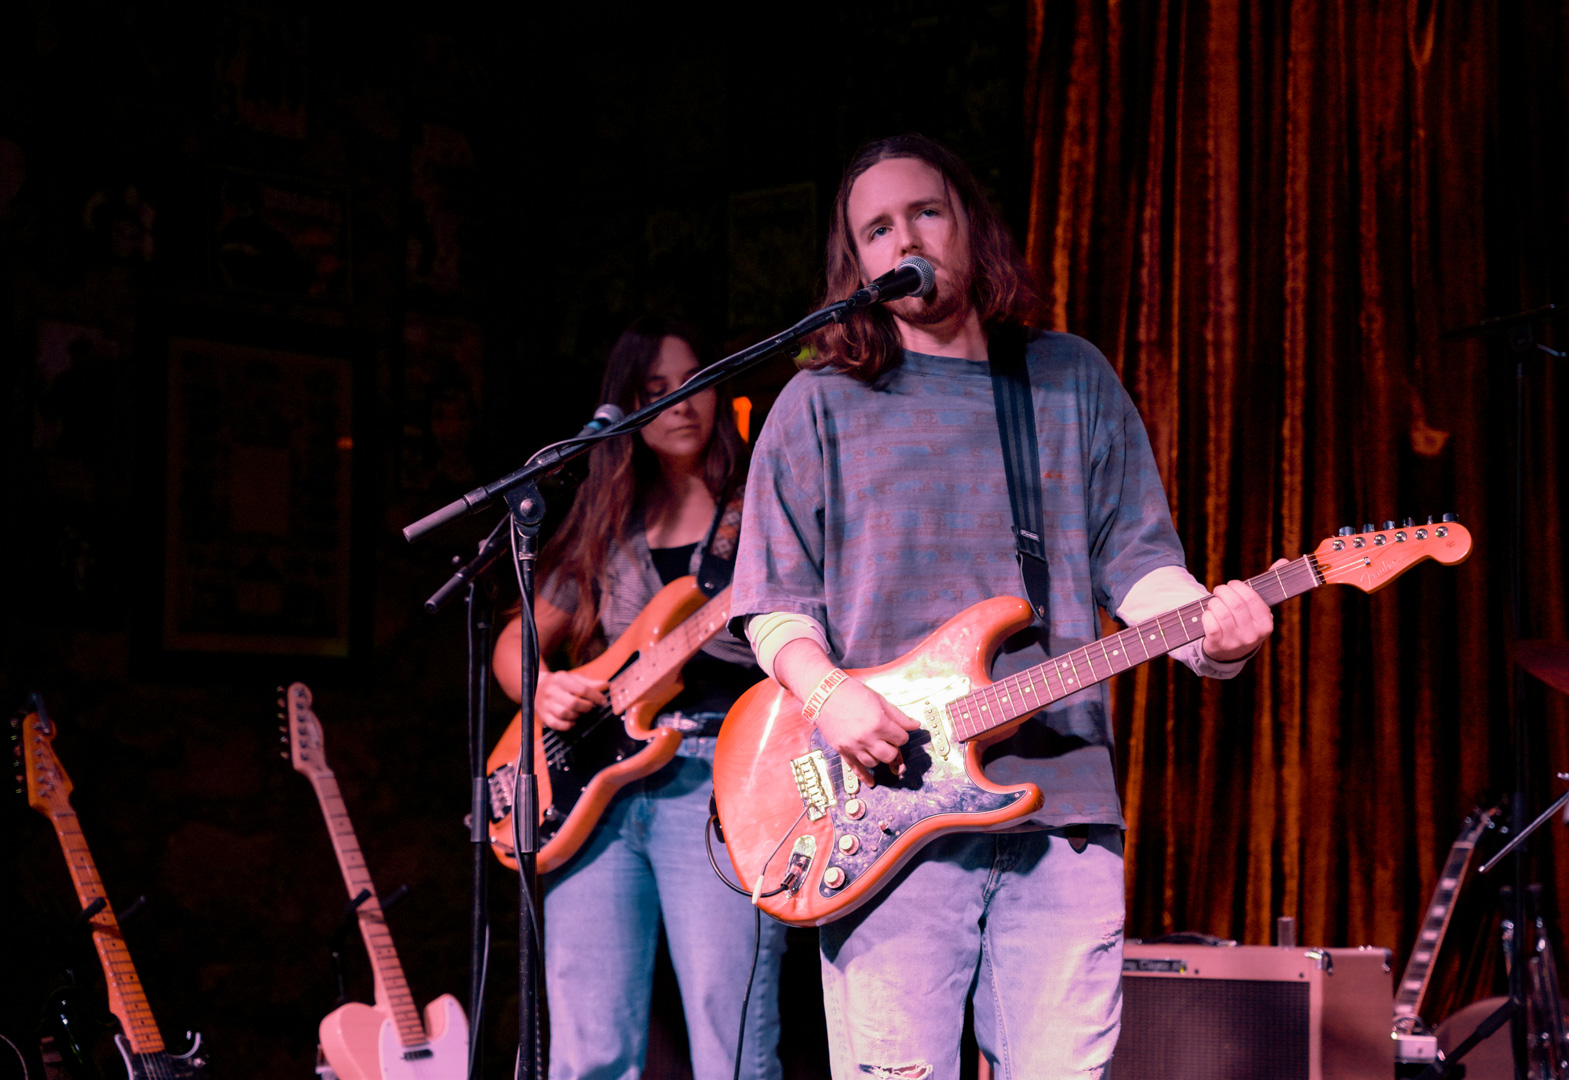 A man playing guitar and singing, a woman behind him playing bass